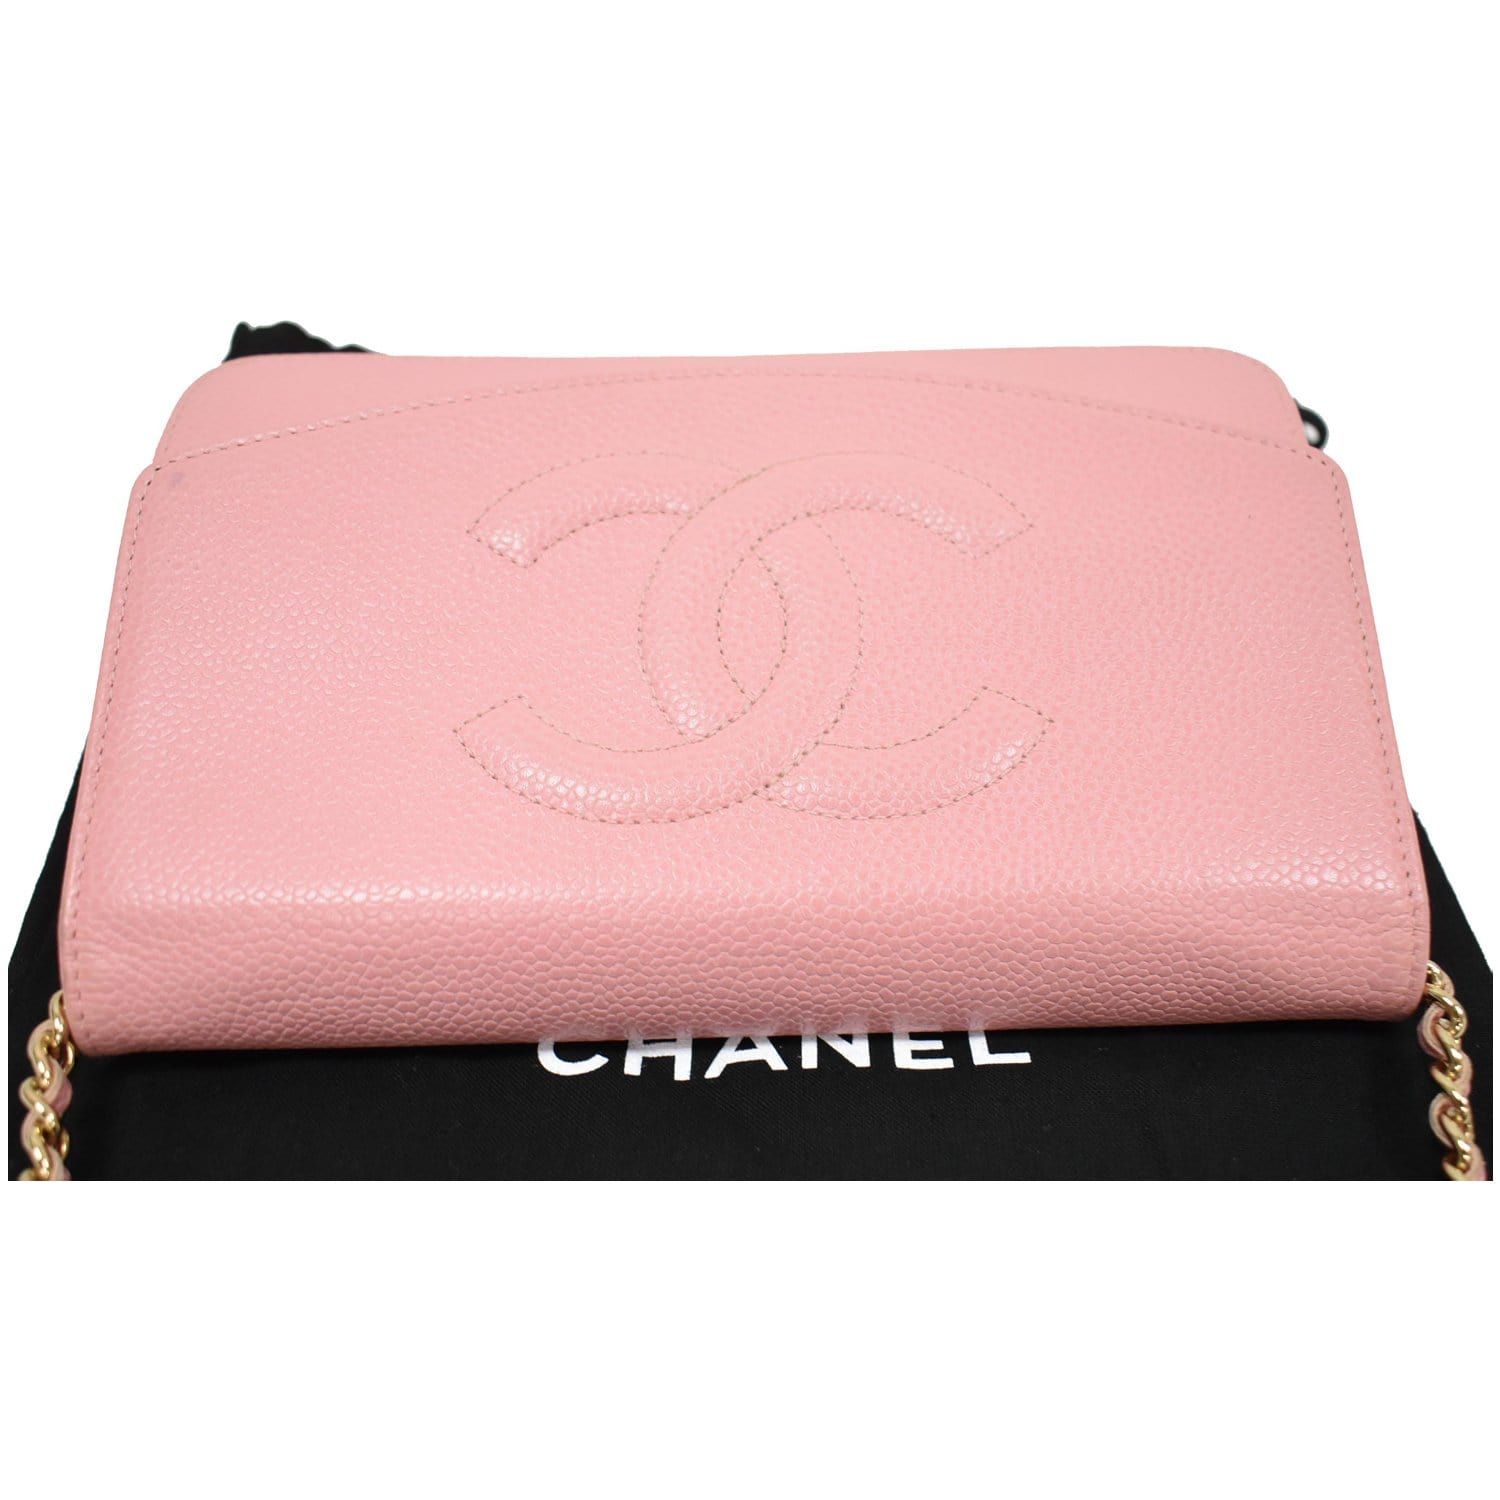 Timeless/classique leather wallet Chanel Pink in Leather - 34786363